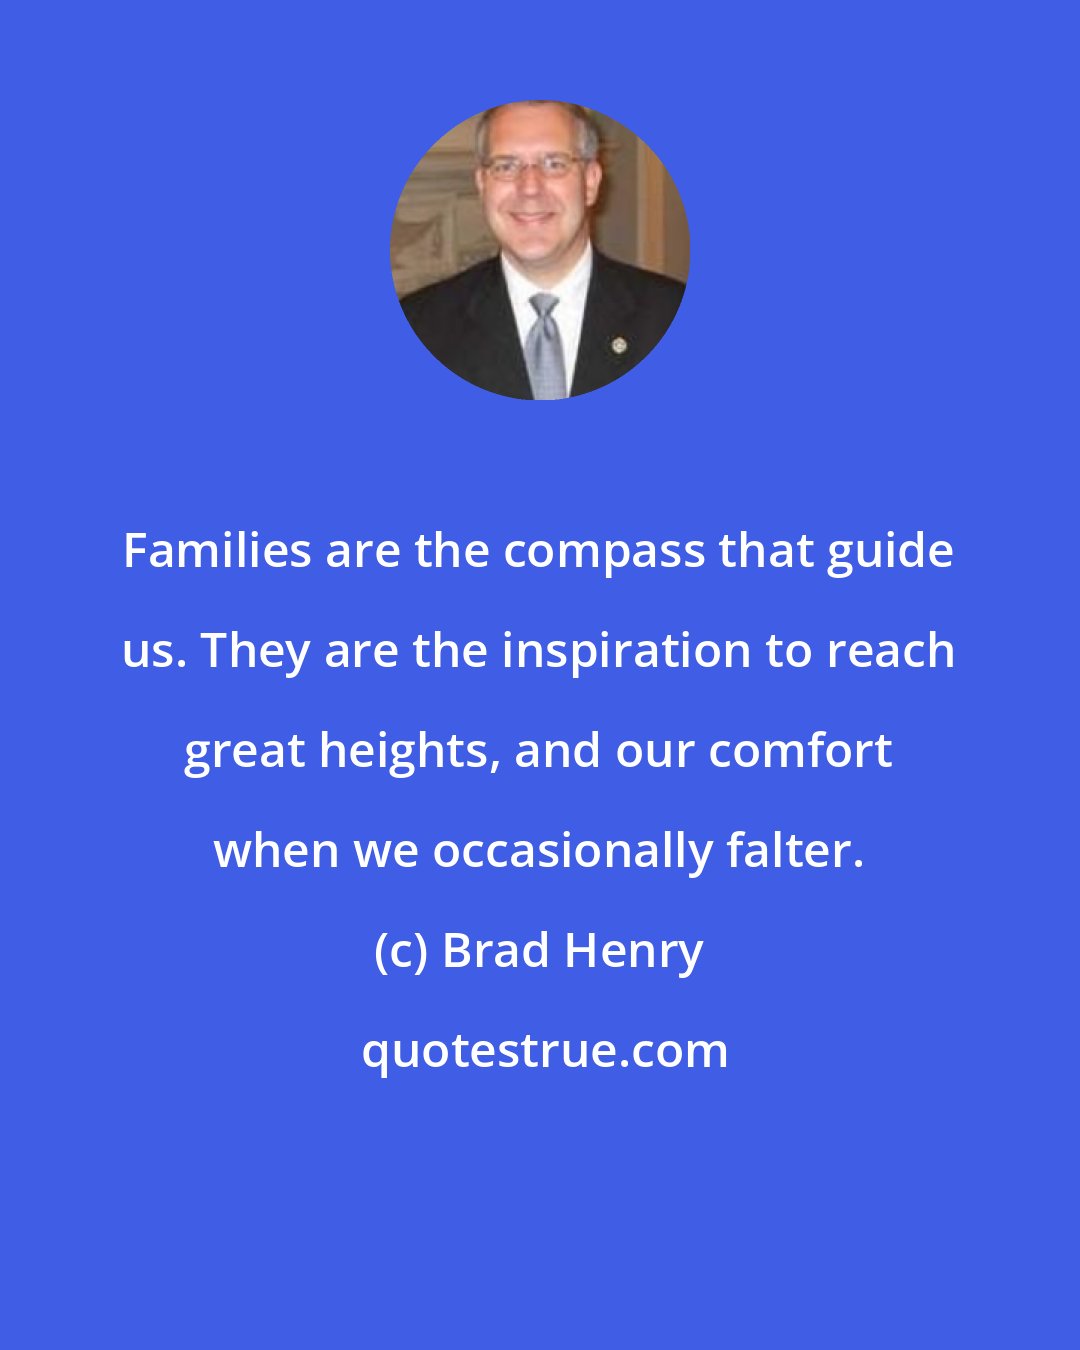 Brad Henry: Families are the compass that guide us. They are the inspiration to reach great heights, and our comfort when we occasionally falter.